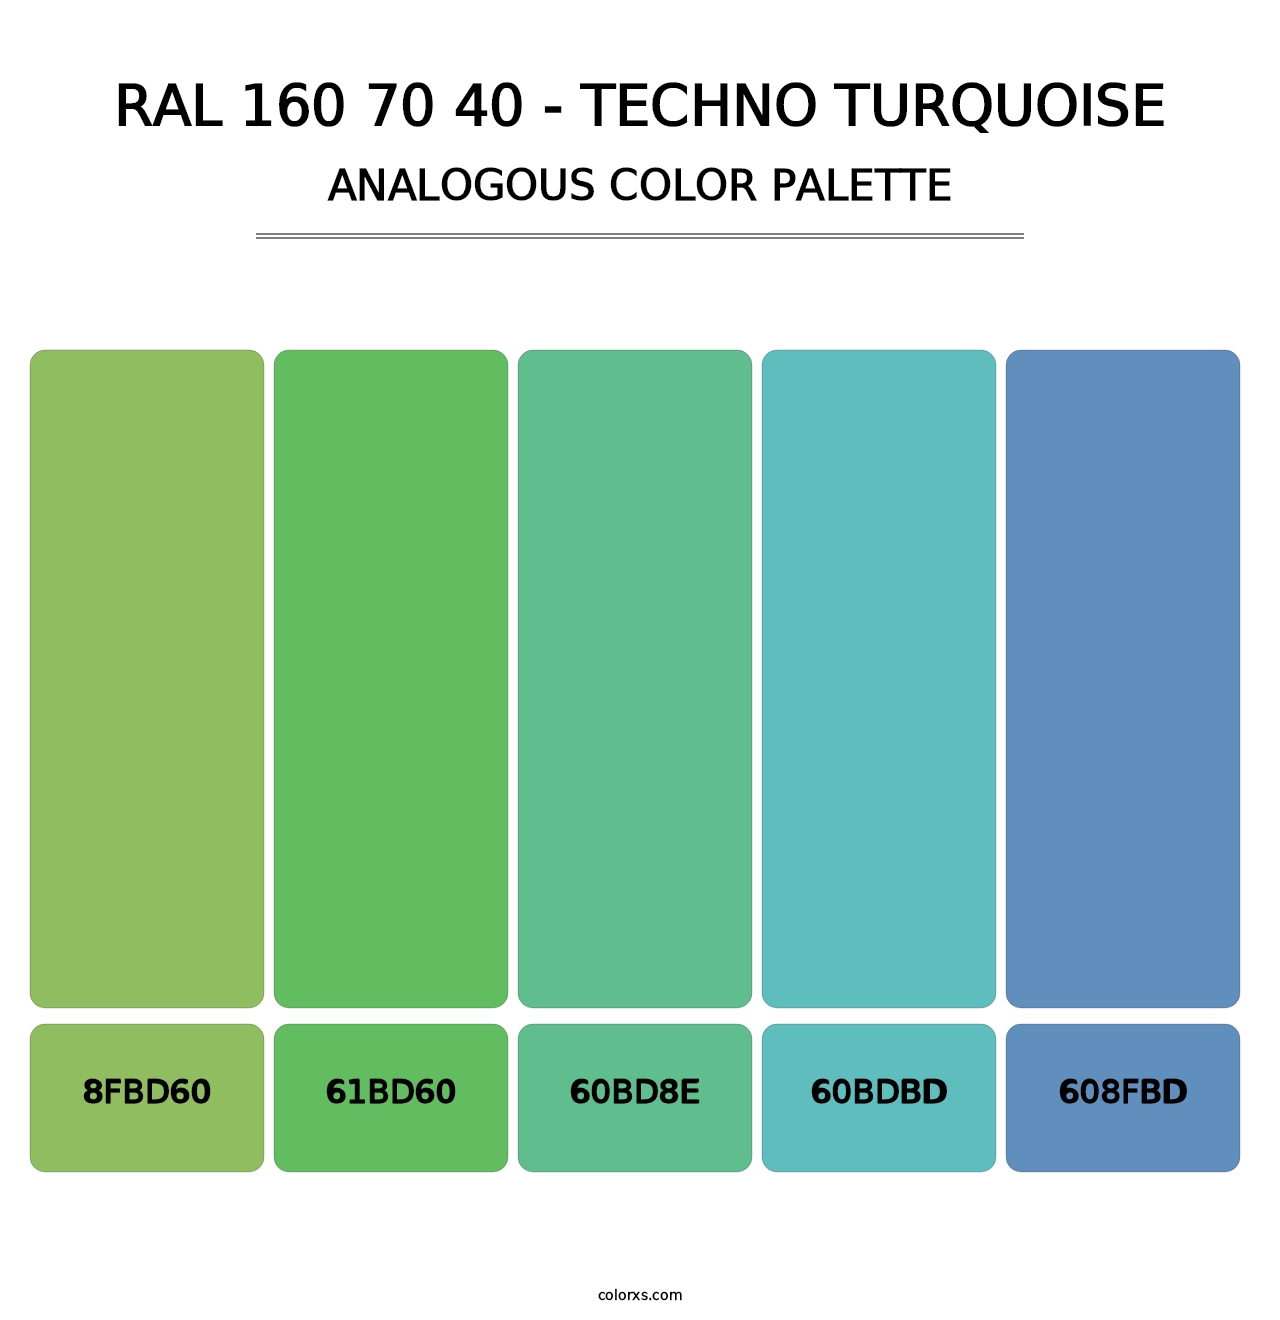 RAL 160 70 40 - Techno Turquoise - Analogous Color Palette